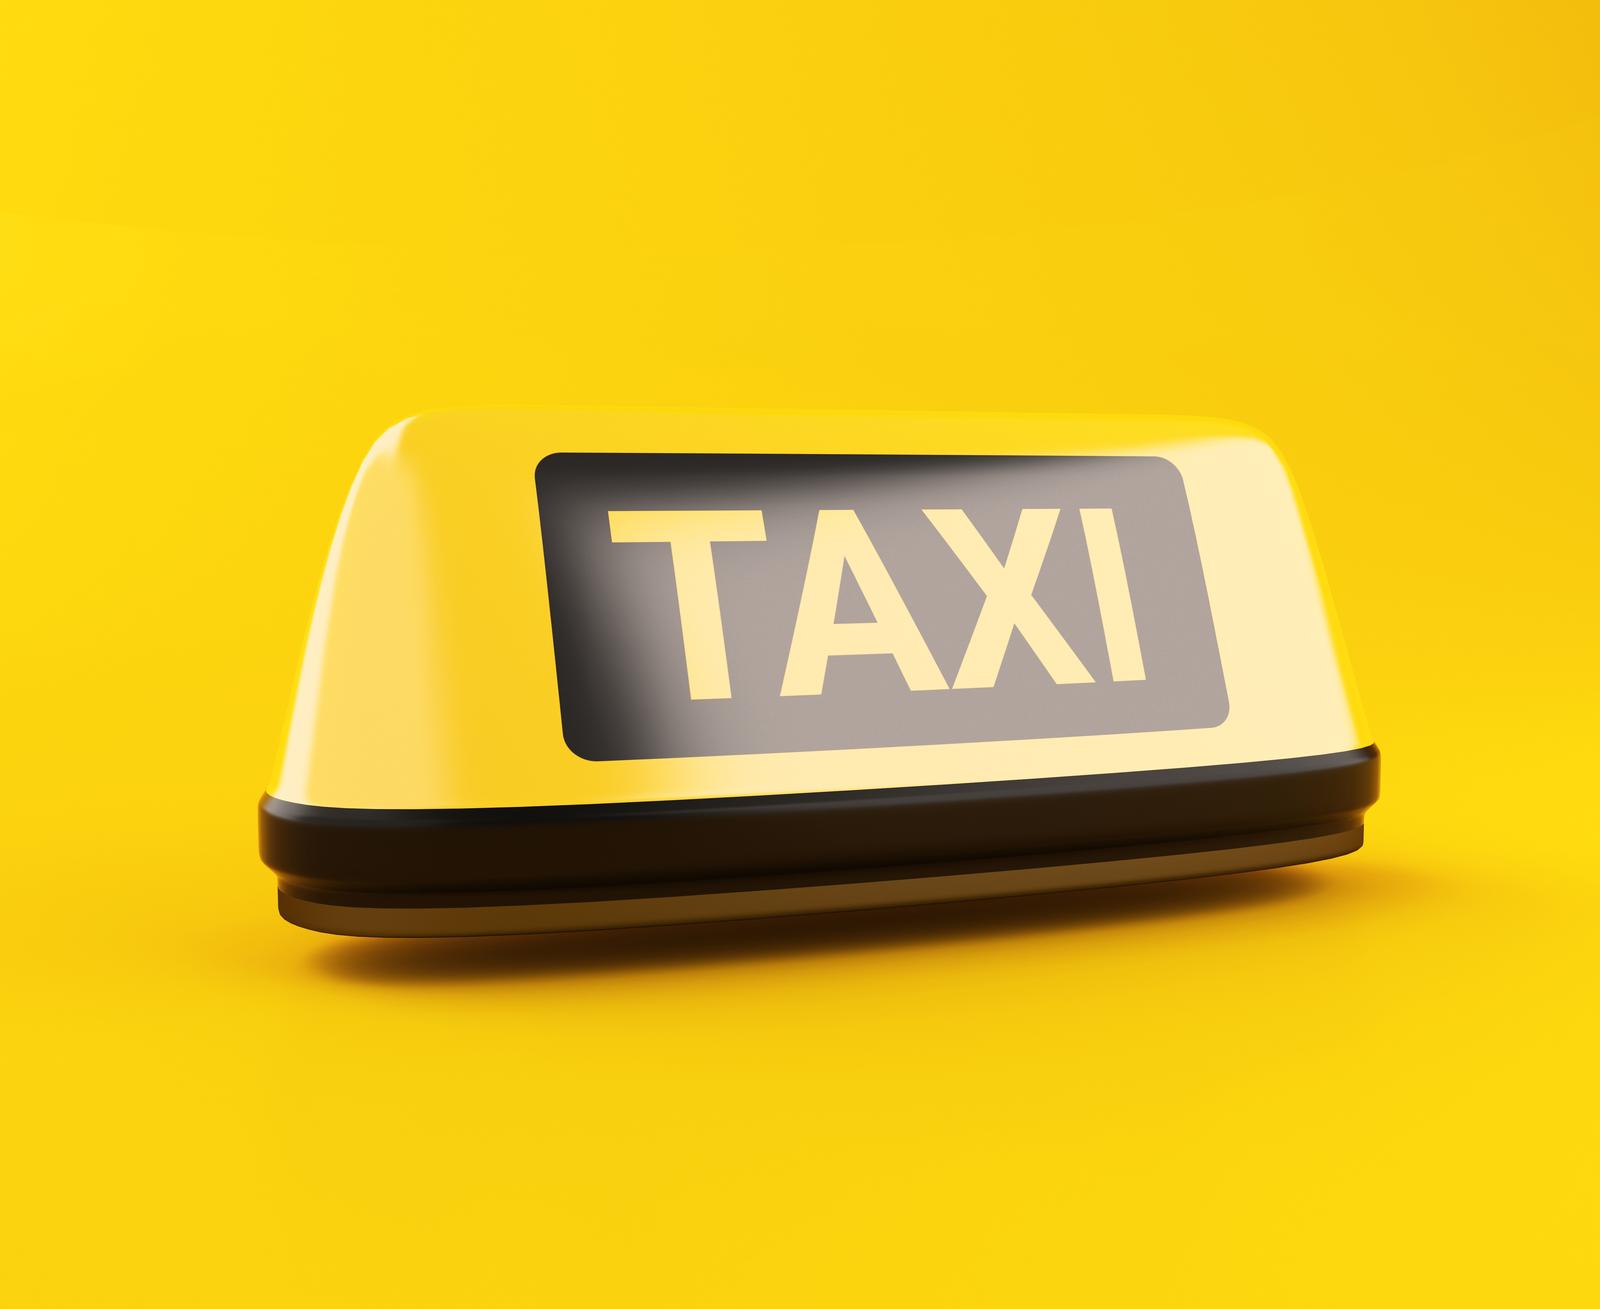 Taxi operation in Paide